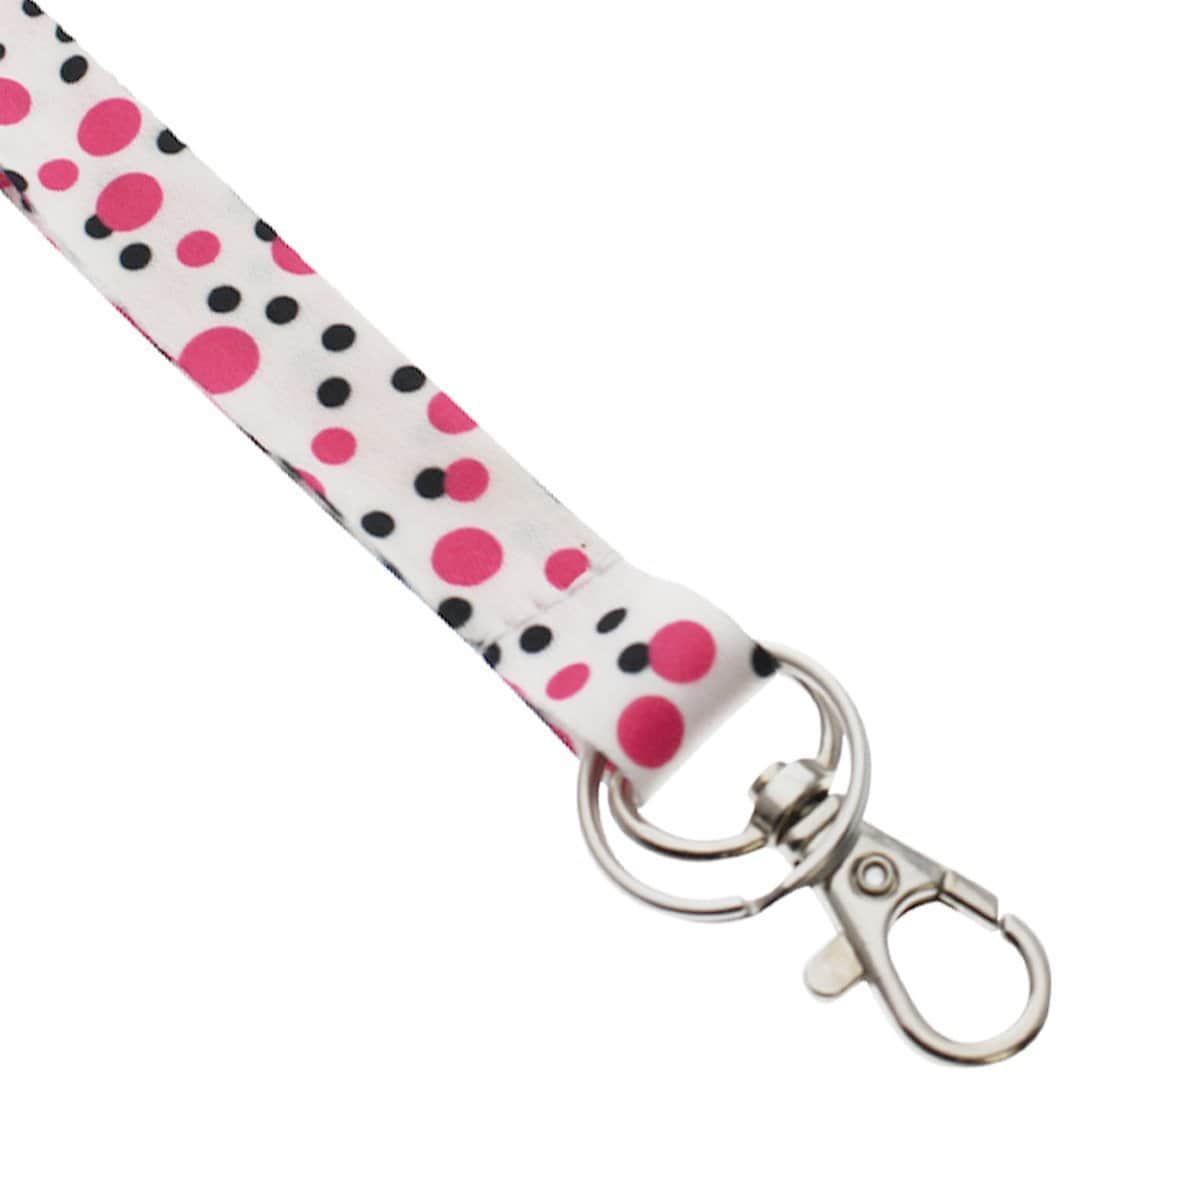 Cute Polka Dot Pattern Fashion Lanyard With Lobster Hook And Key Ring ...